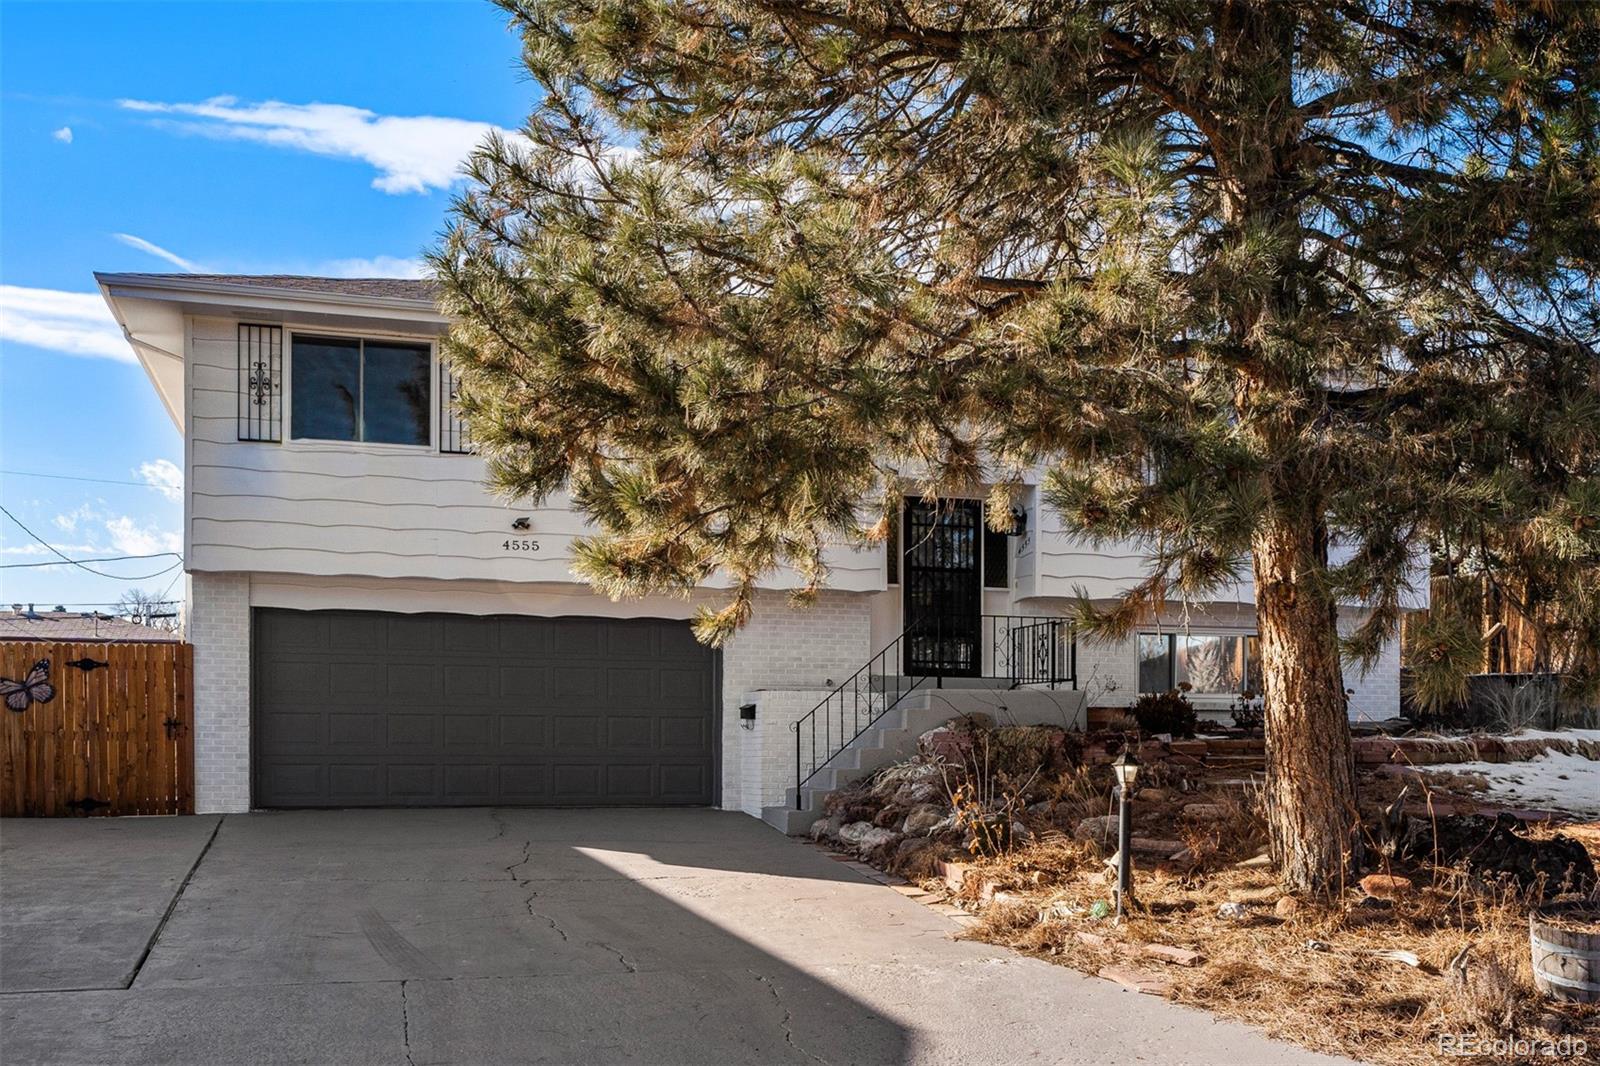 Report Image for 4555 S Knox Court,Englewood, Colorado